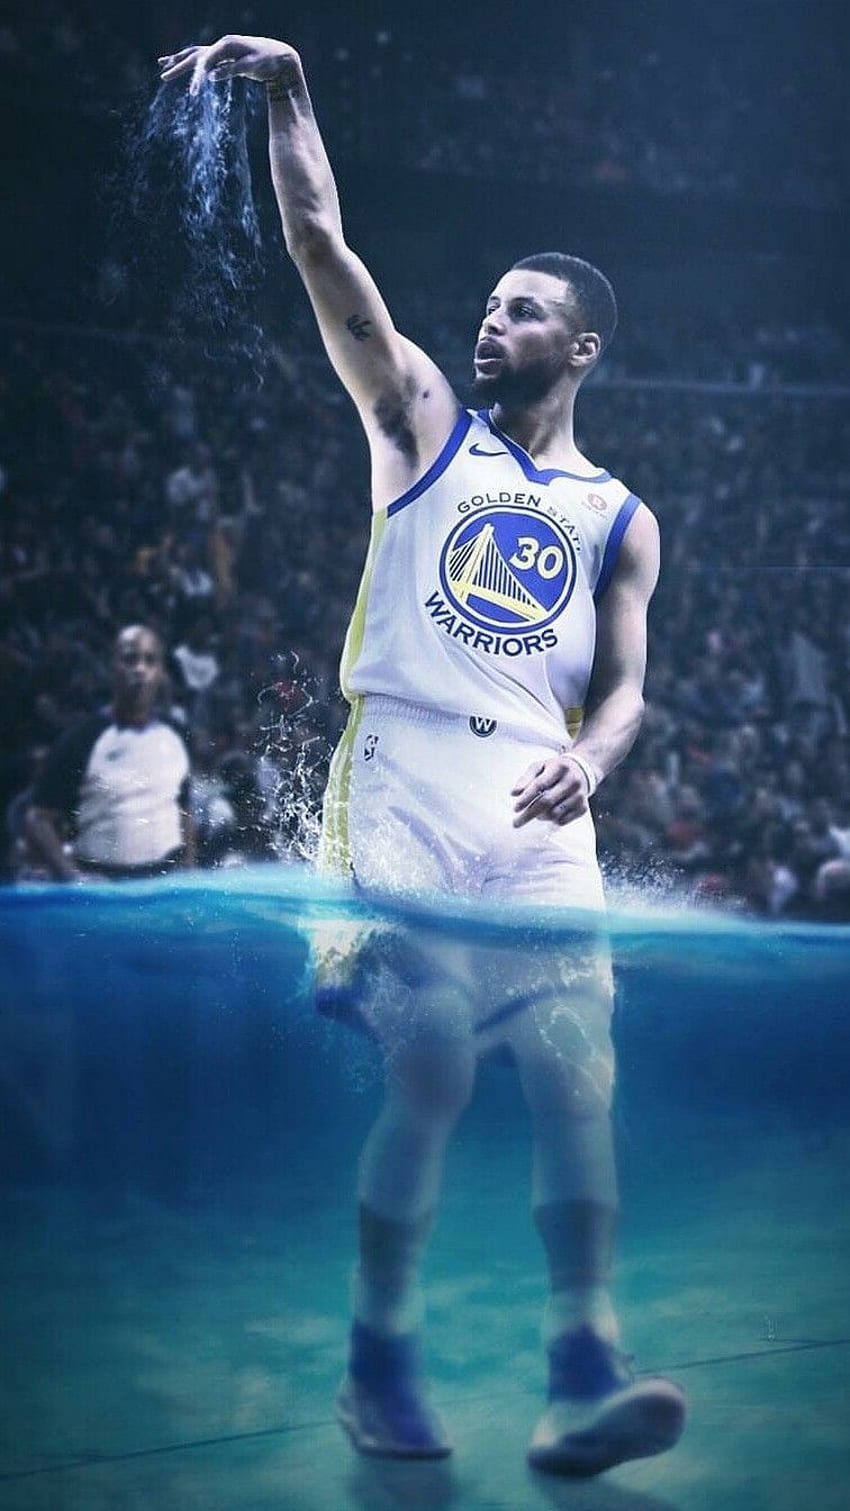 Replying to @imaginarychanges #wallpaper #stephcurry #goldenstatewarri, Stephen  Curry